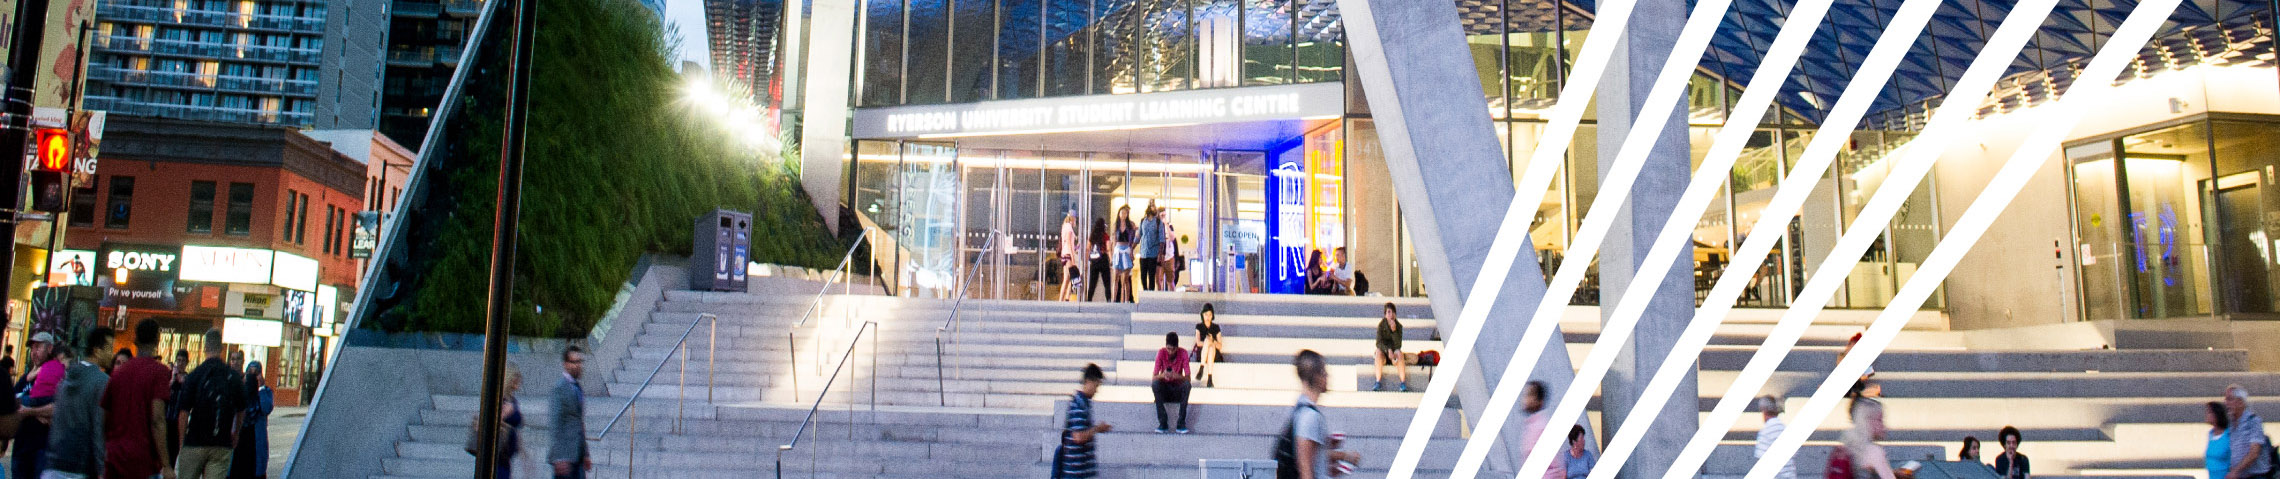 The front steps of the Student Learning Centre building at Ryerson in the evening time.